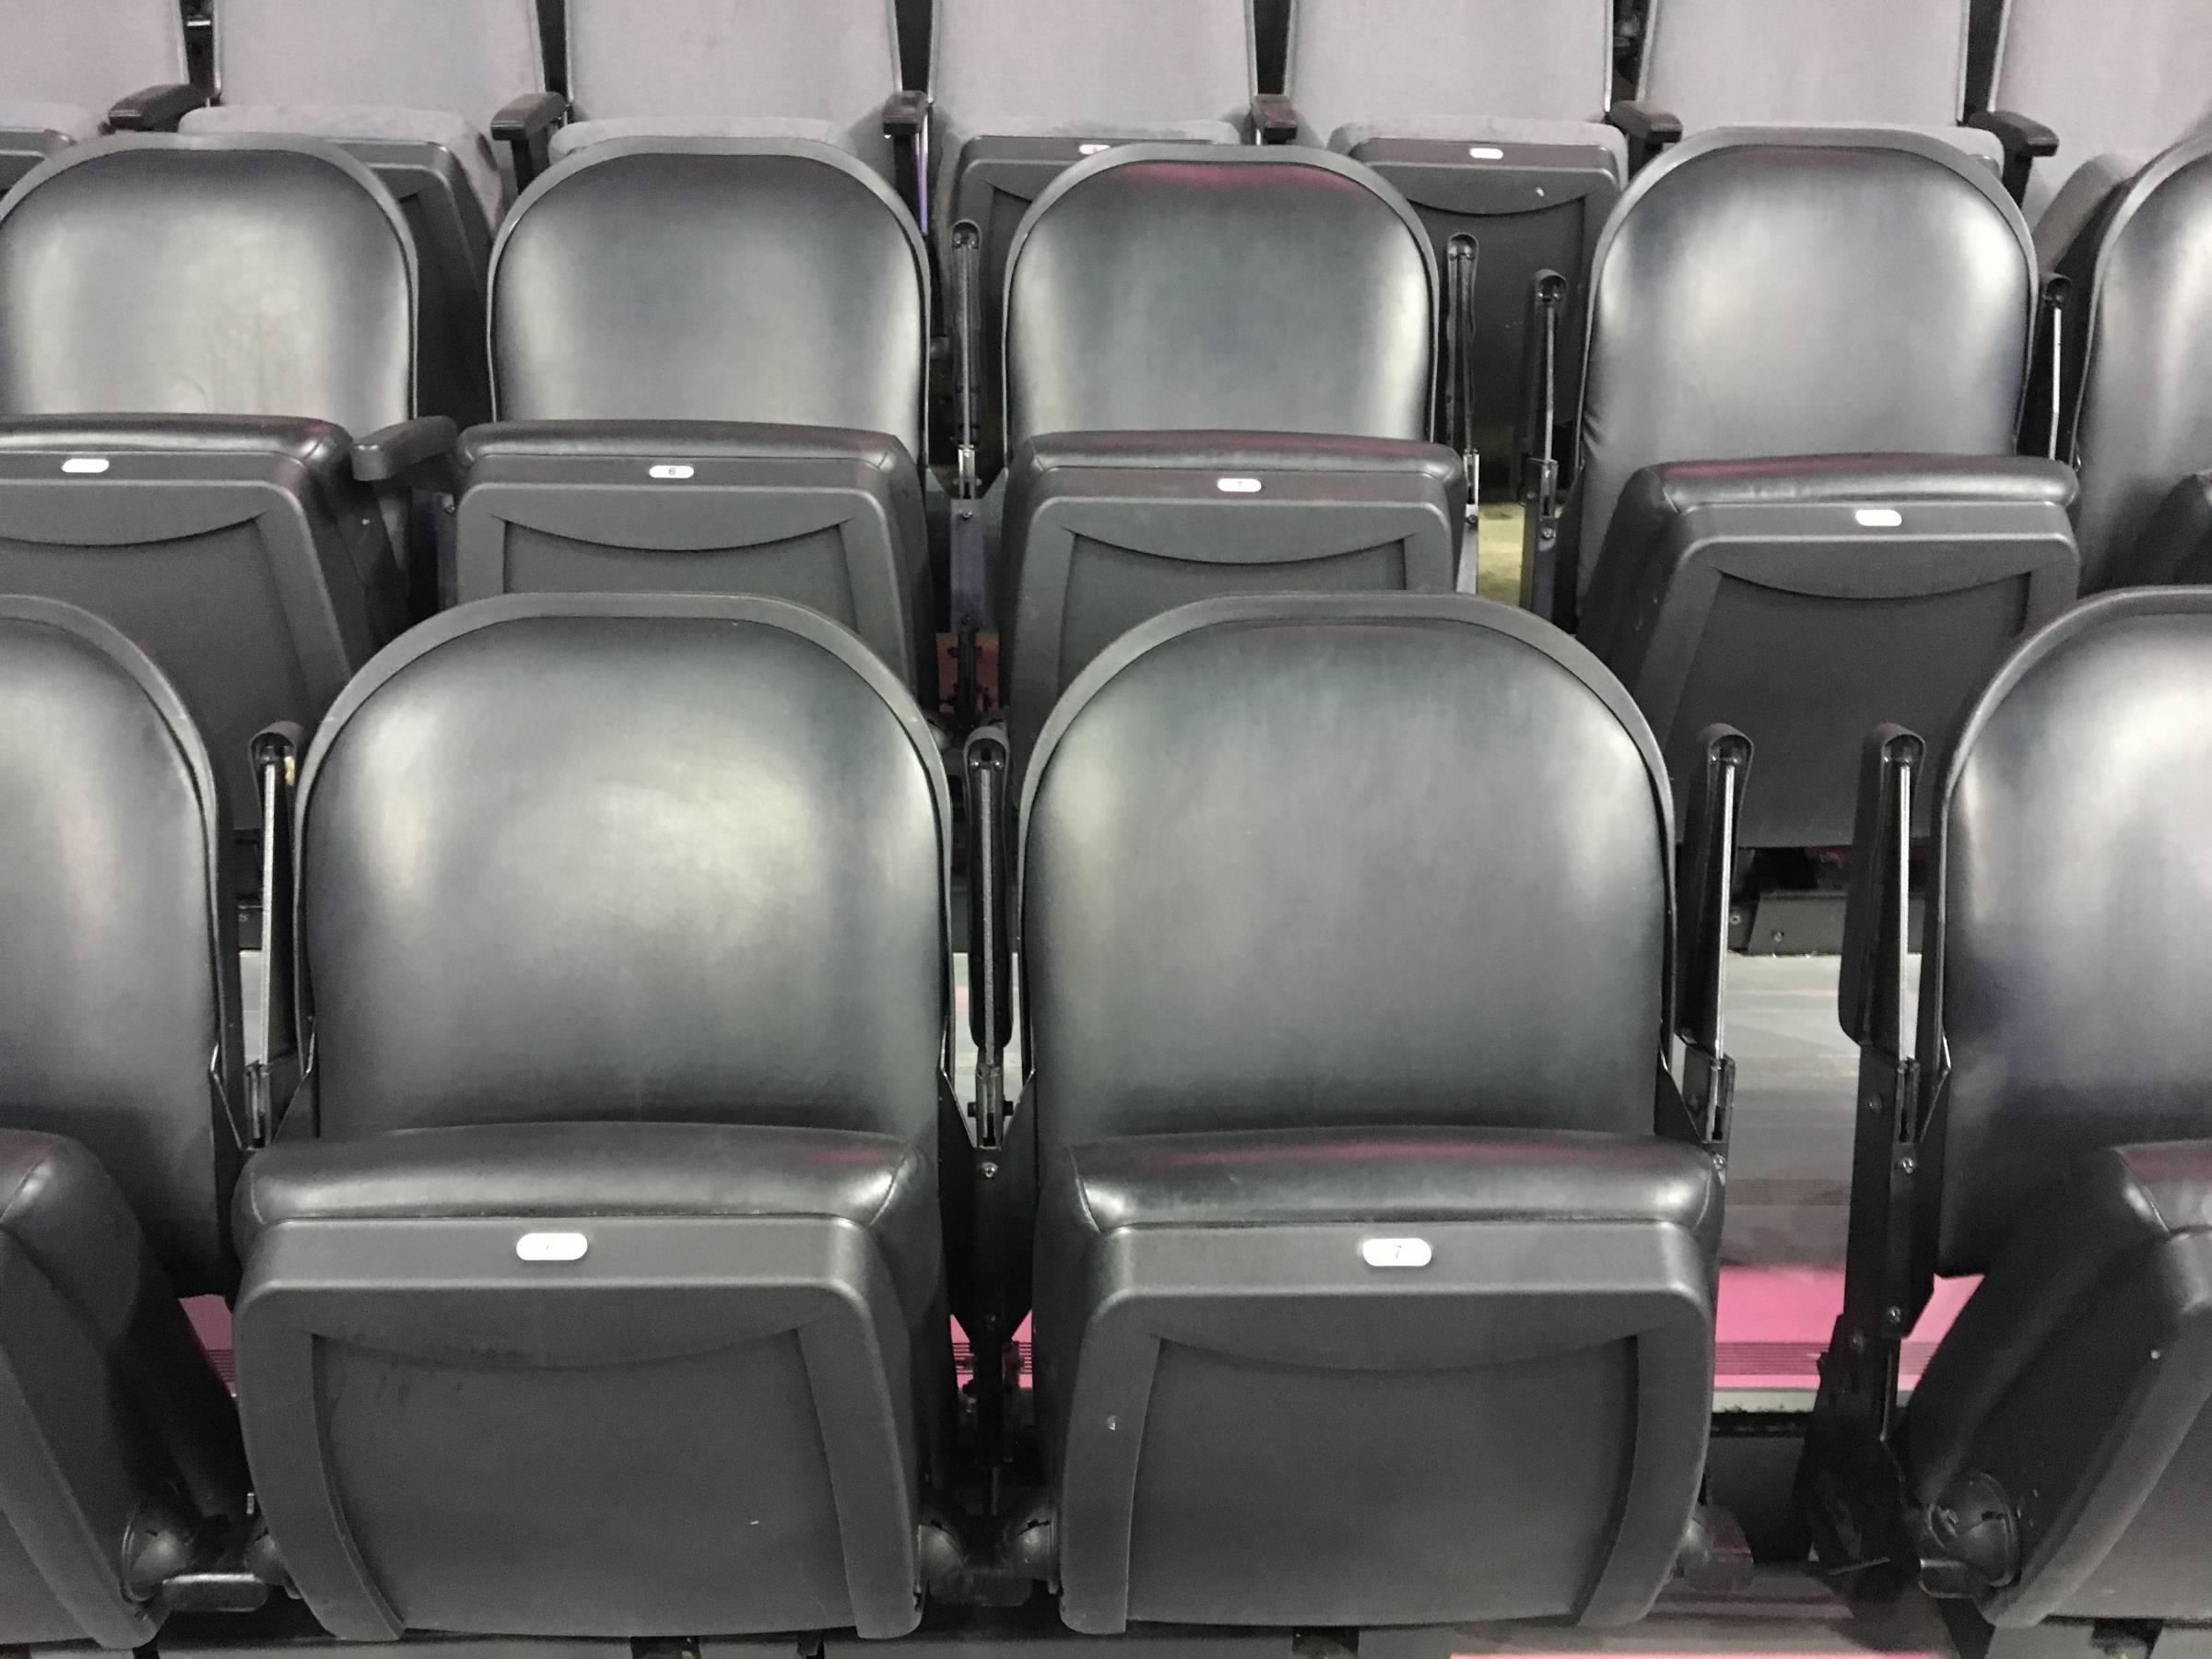 Lower Level Baseline Seats at Paycom Center